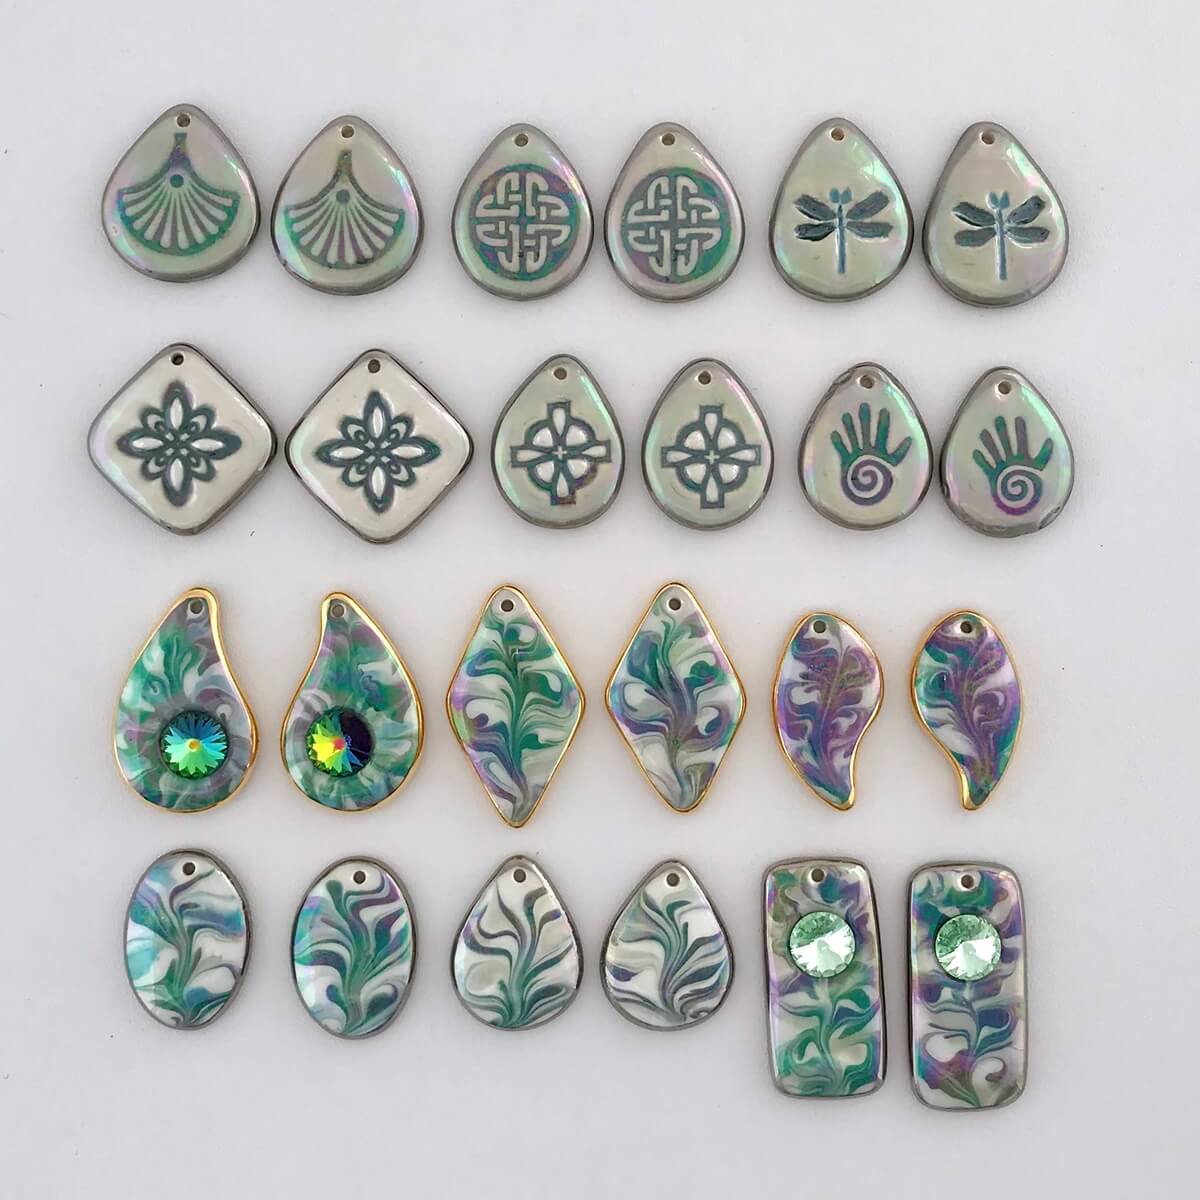 Earring components in shades of green.